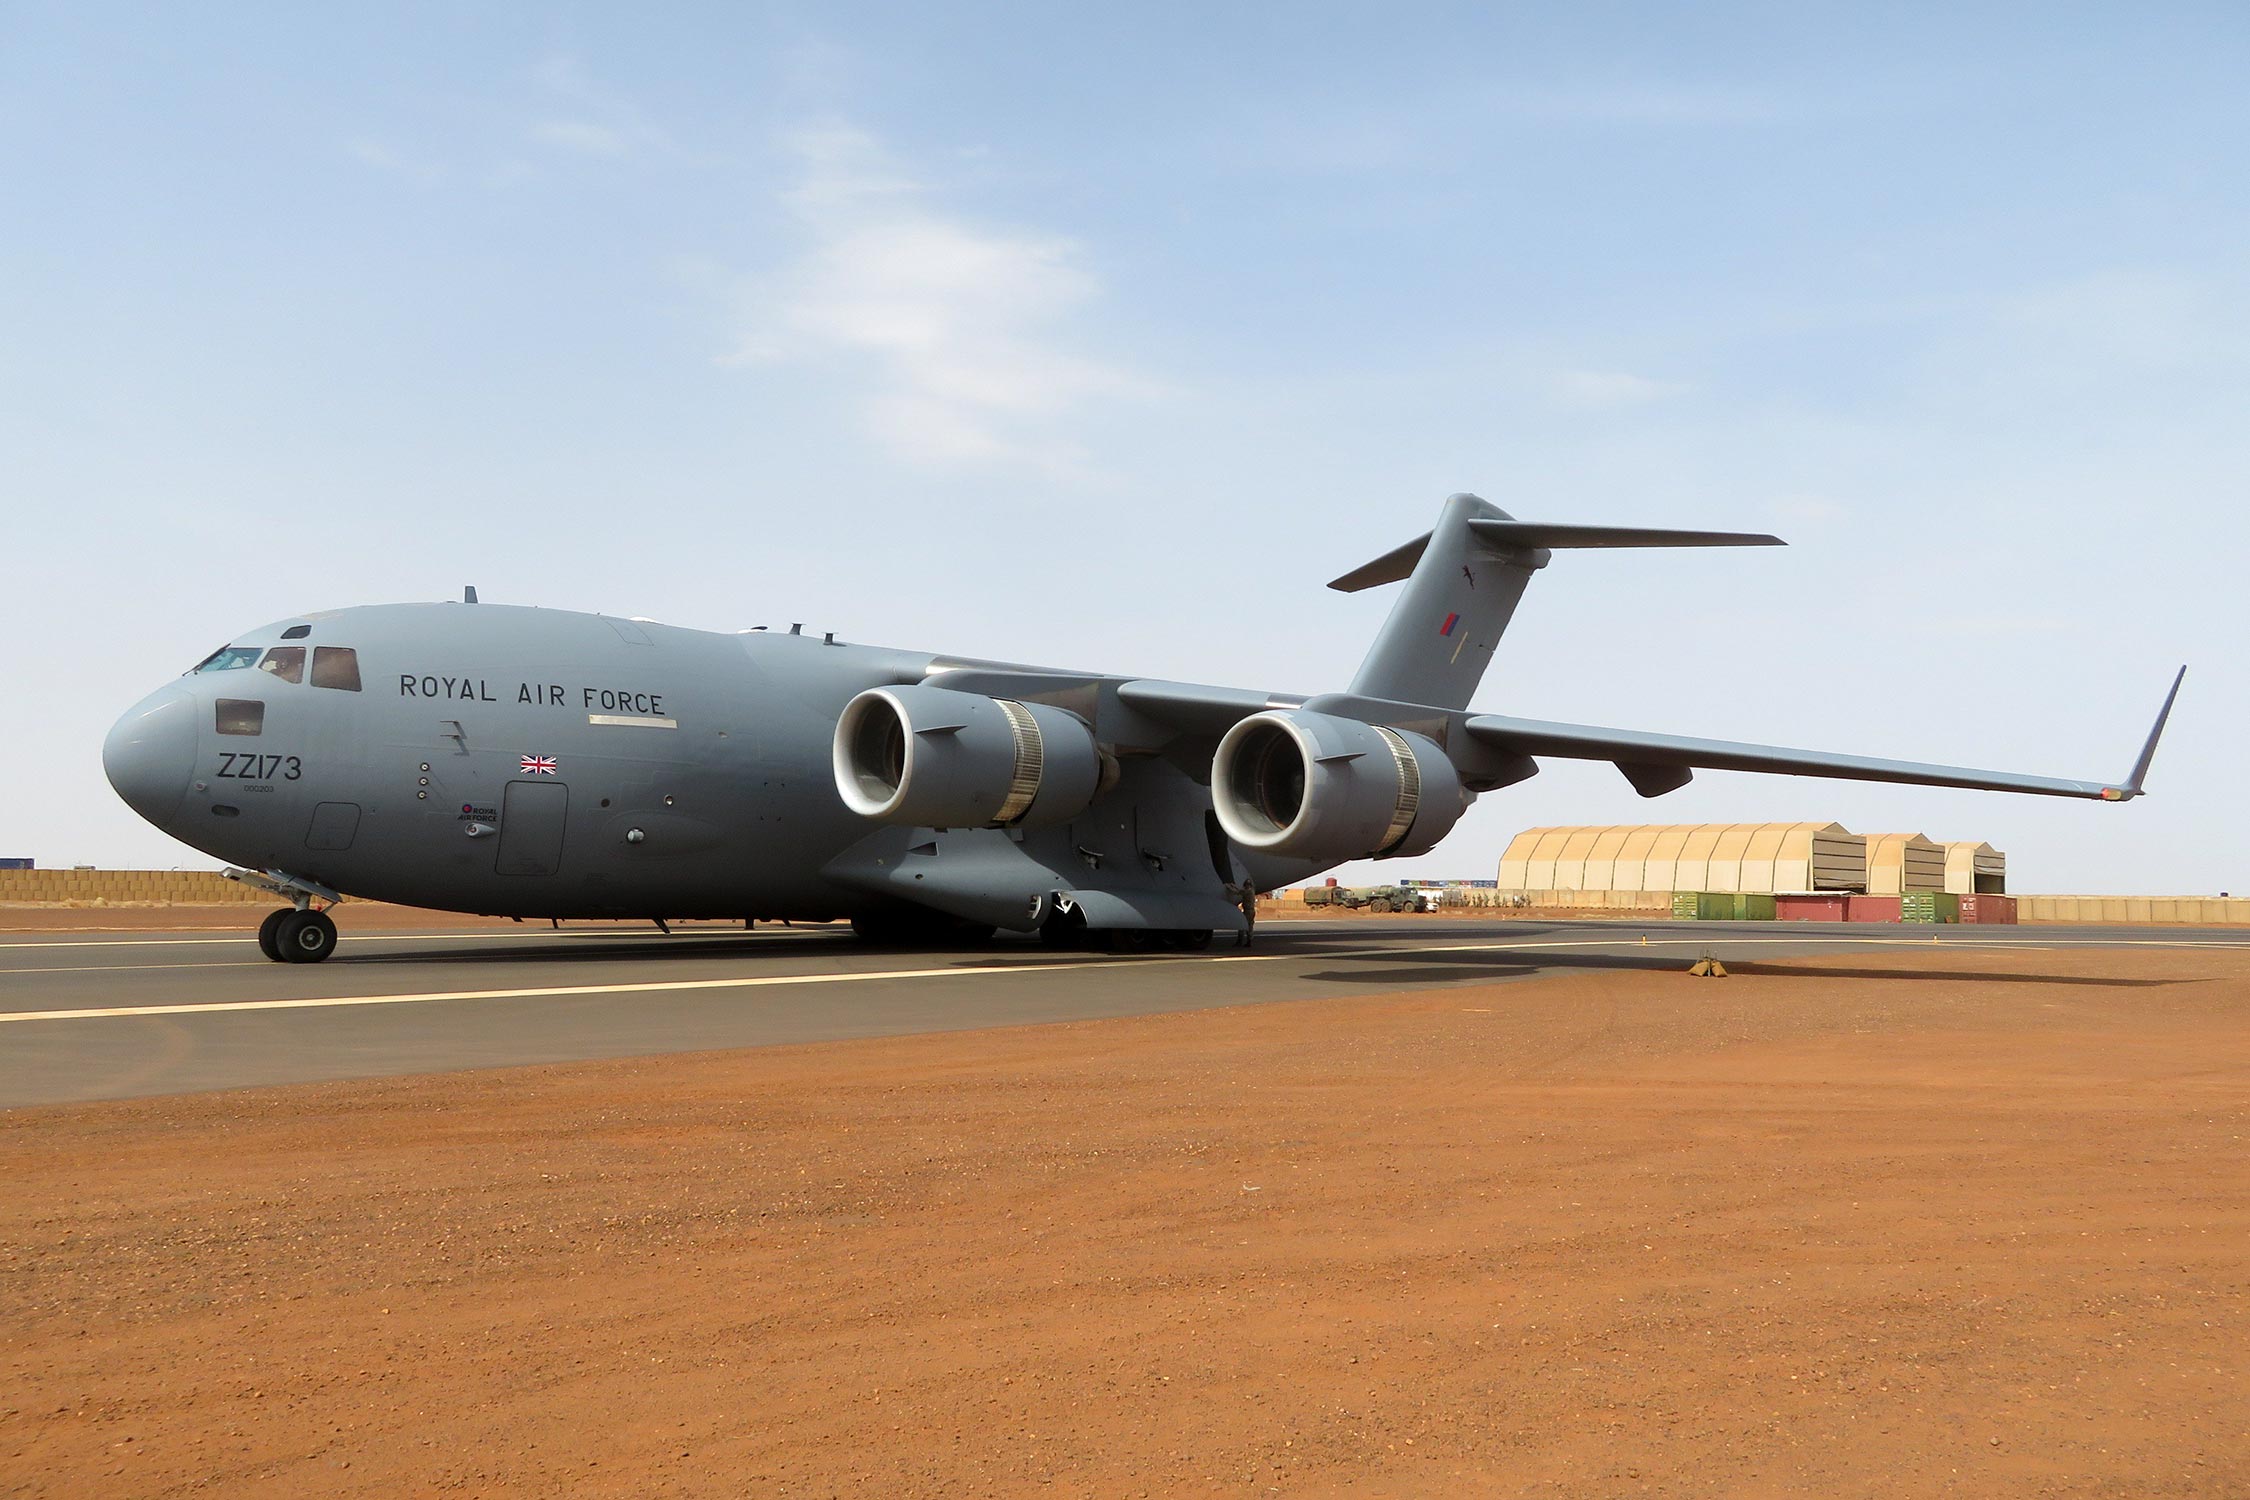 RAF C-17 Globemaster land in Gao, Mali for the first time